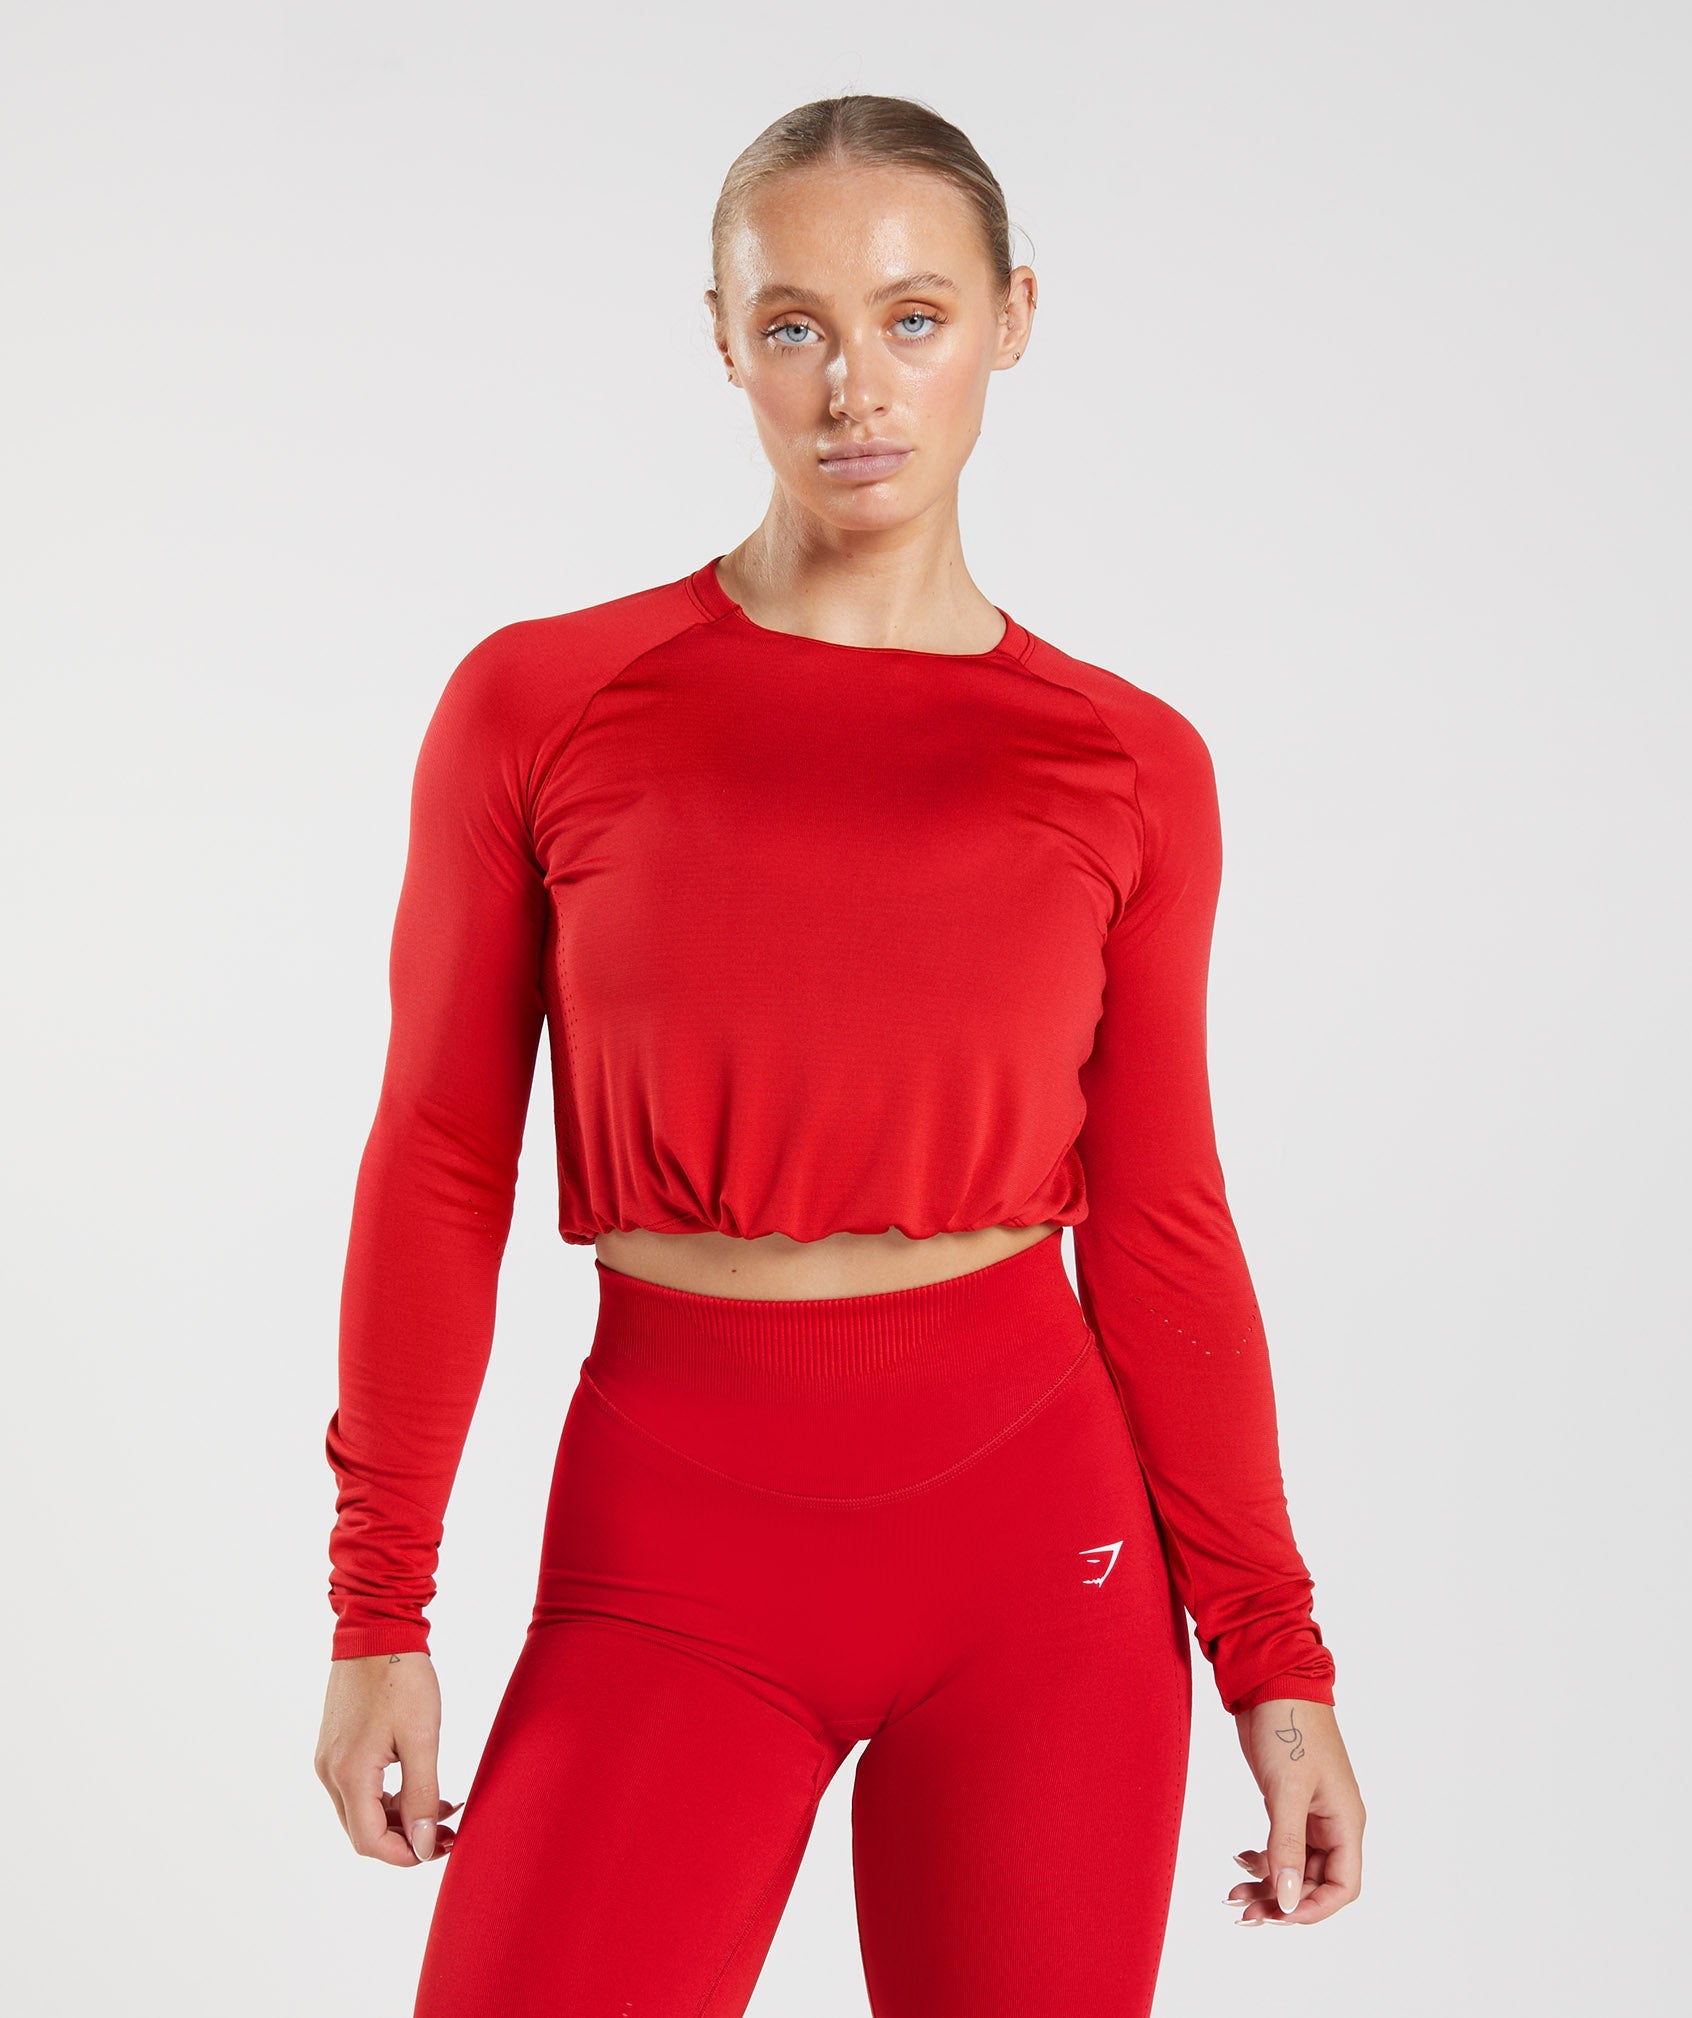 Feather Tech Long-Sleeve Top  Long sleeve tops, Long tops, Active wear for  women